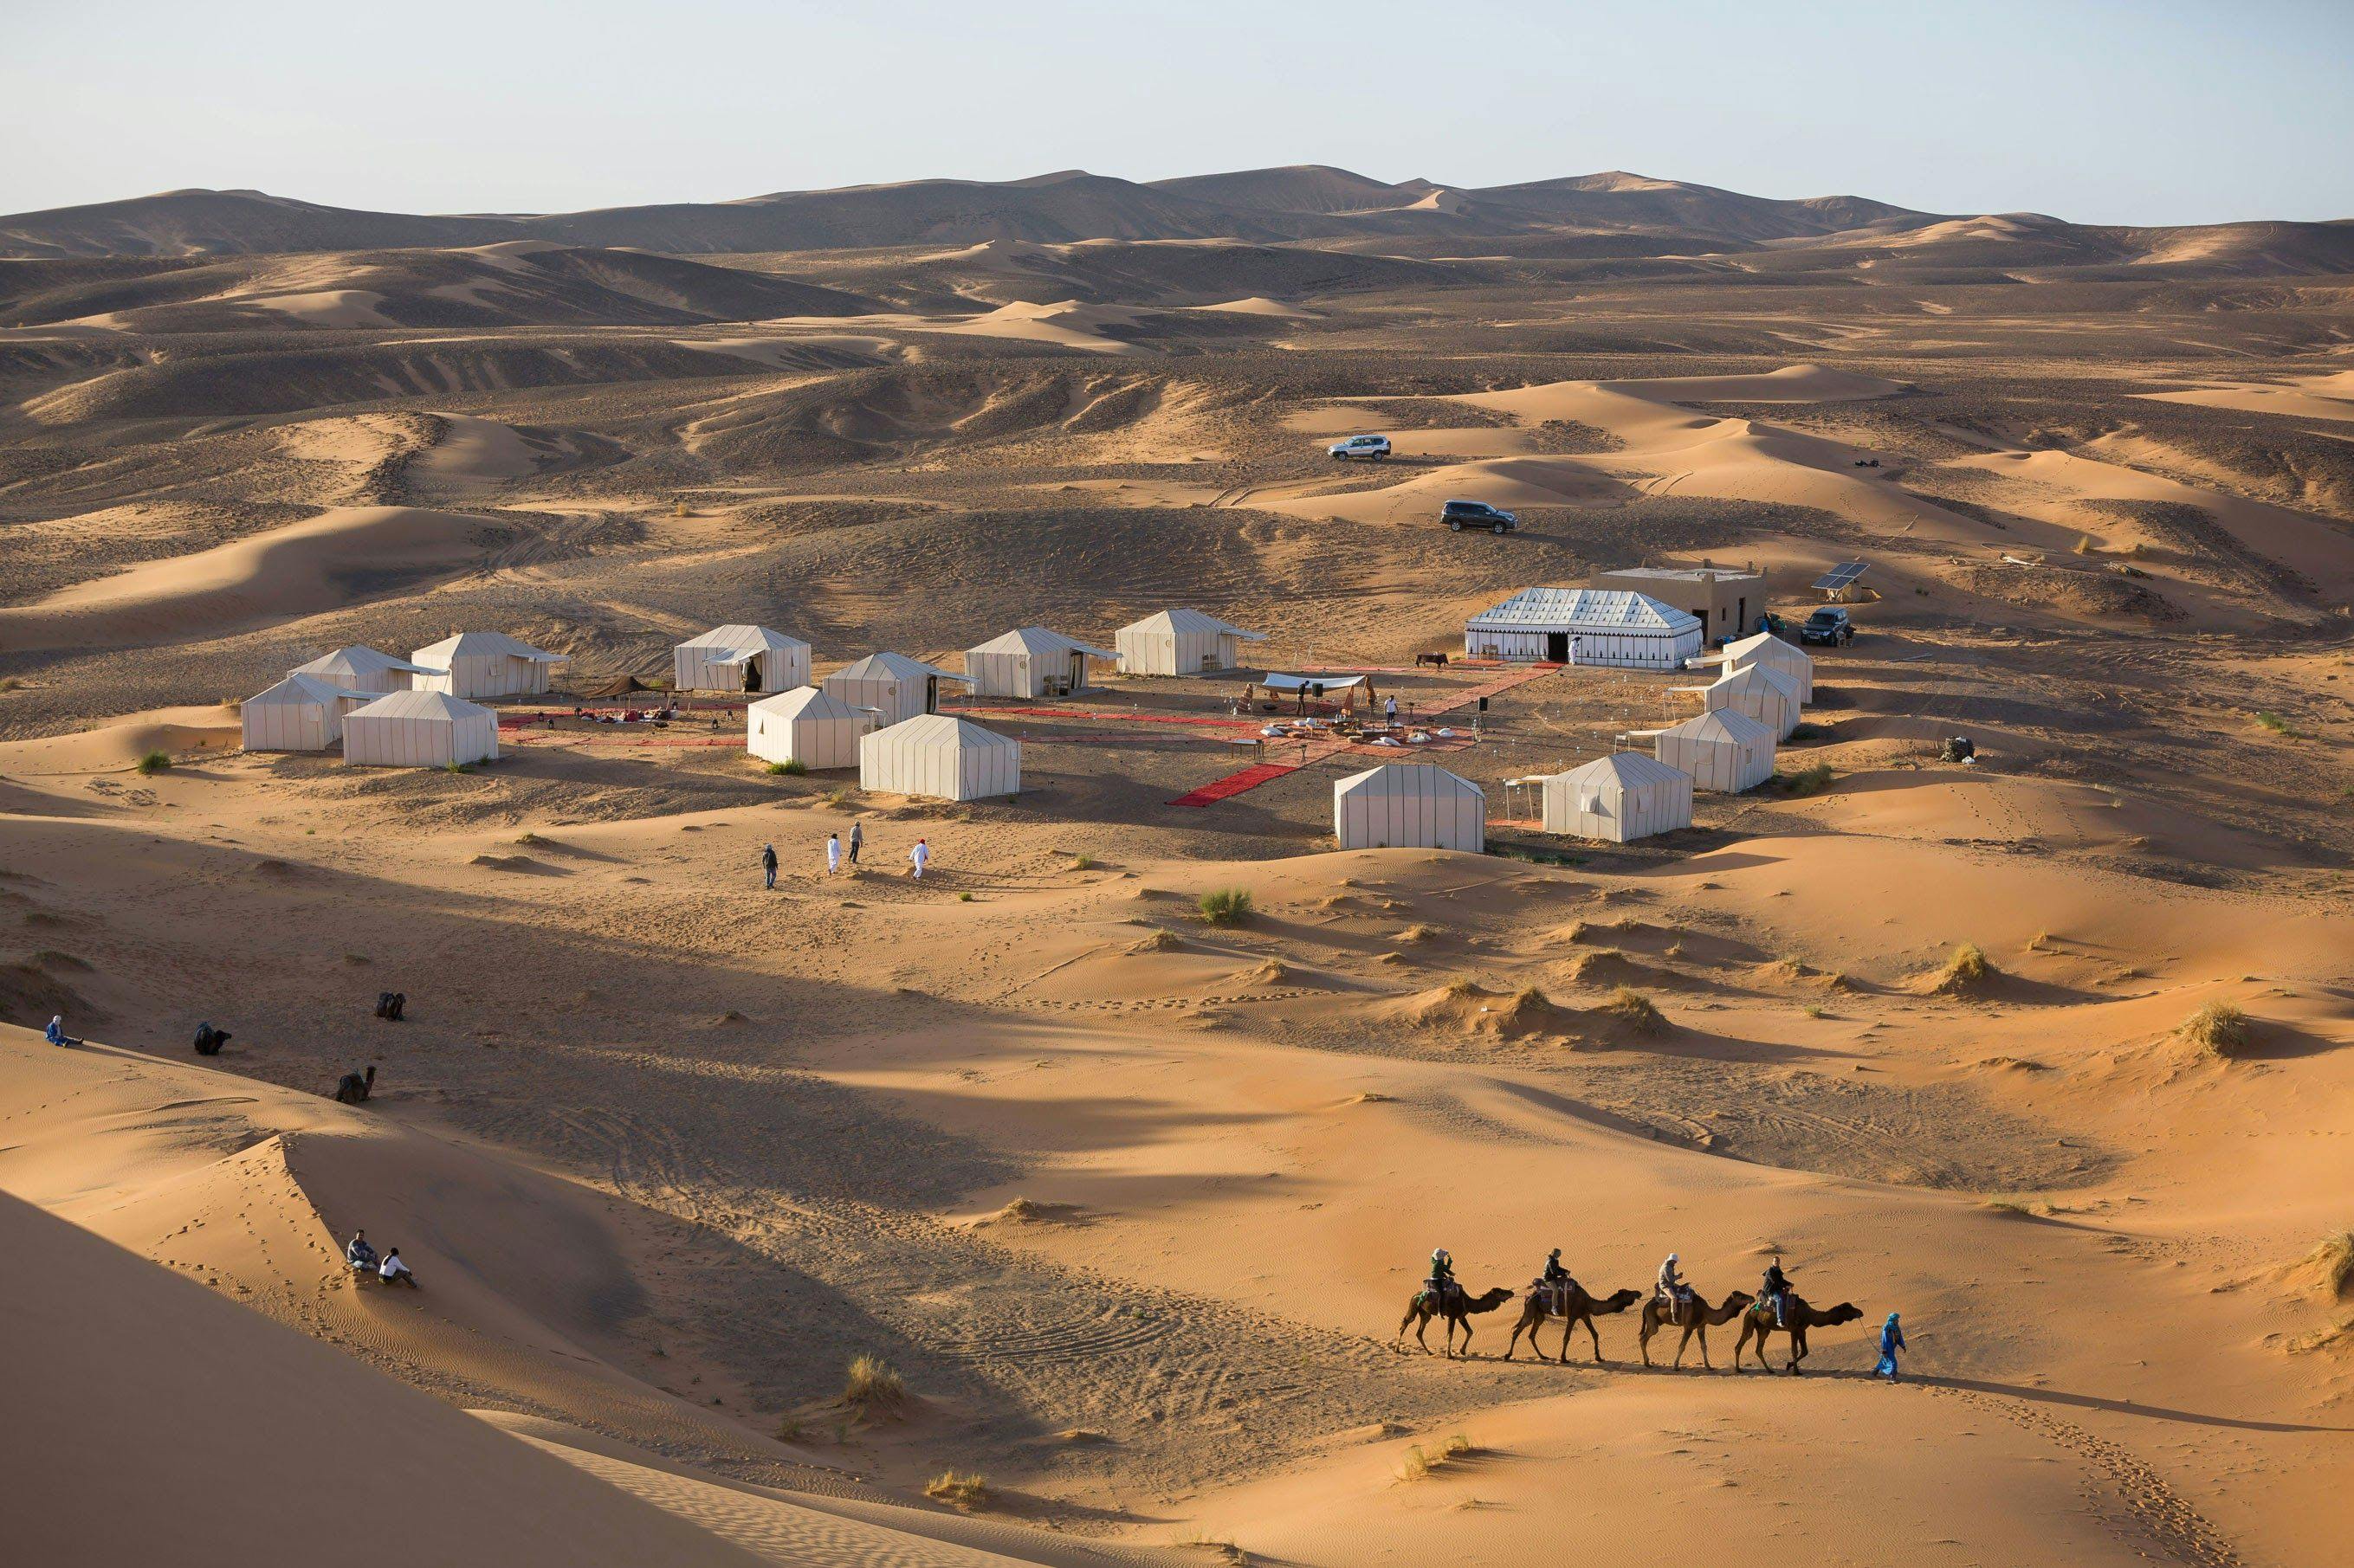 campsite of Merzouga Luxury Desert Camps and four camels